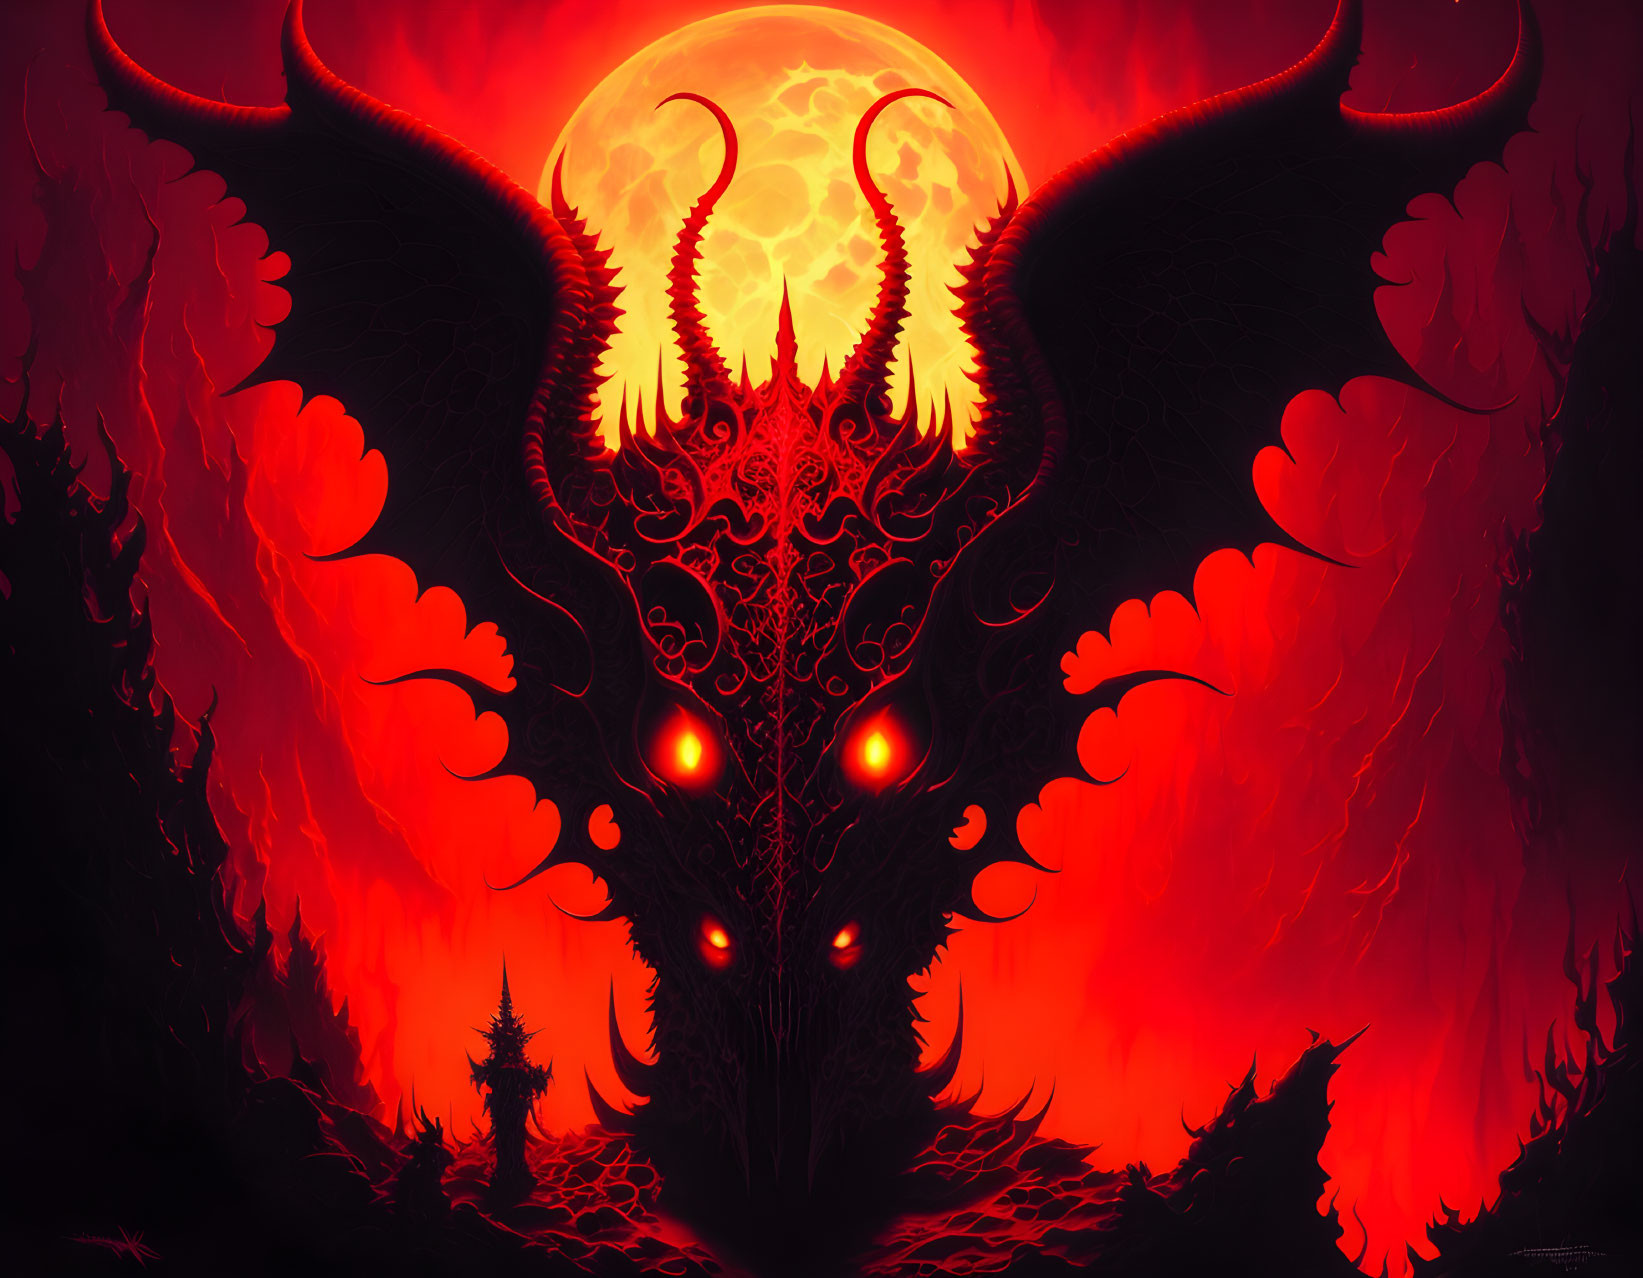 Fantastical red and black demonic entity under crescent moon.